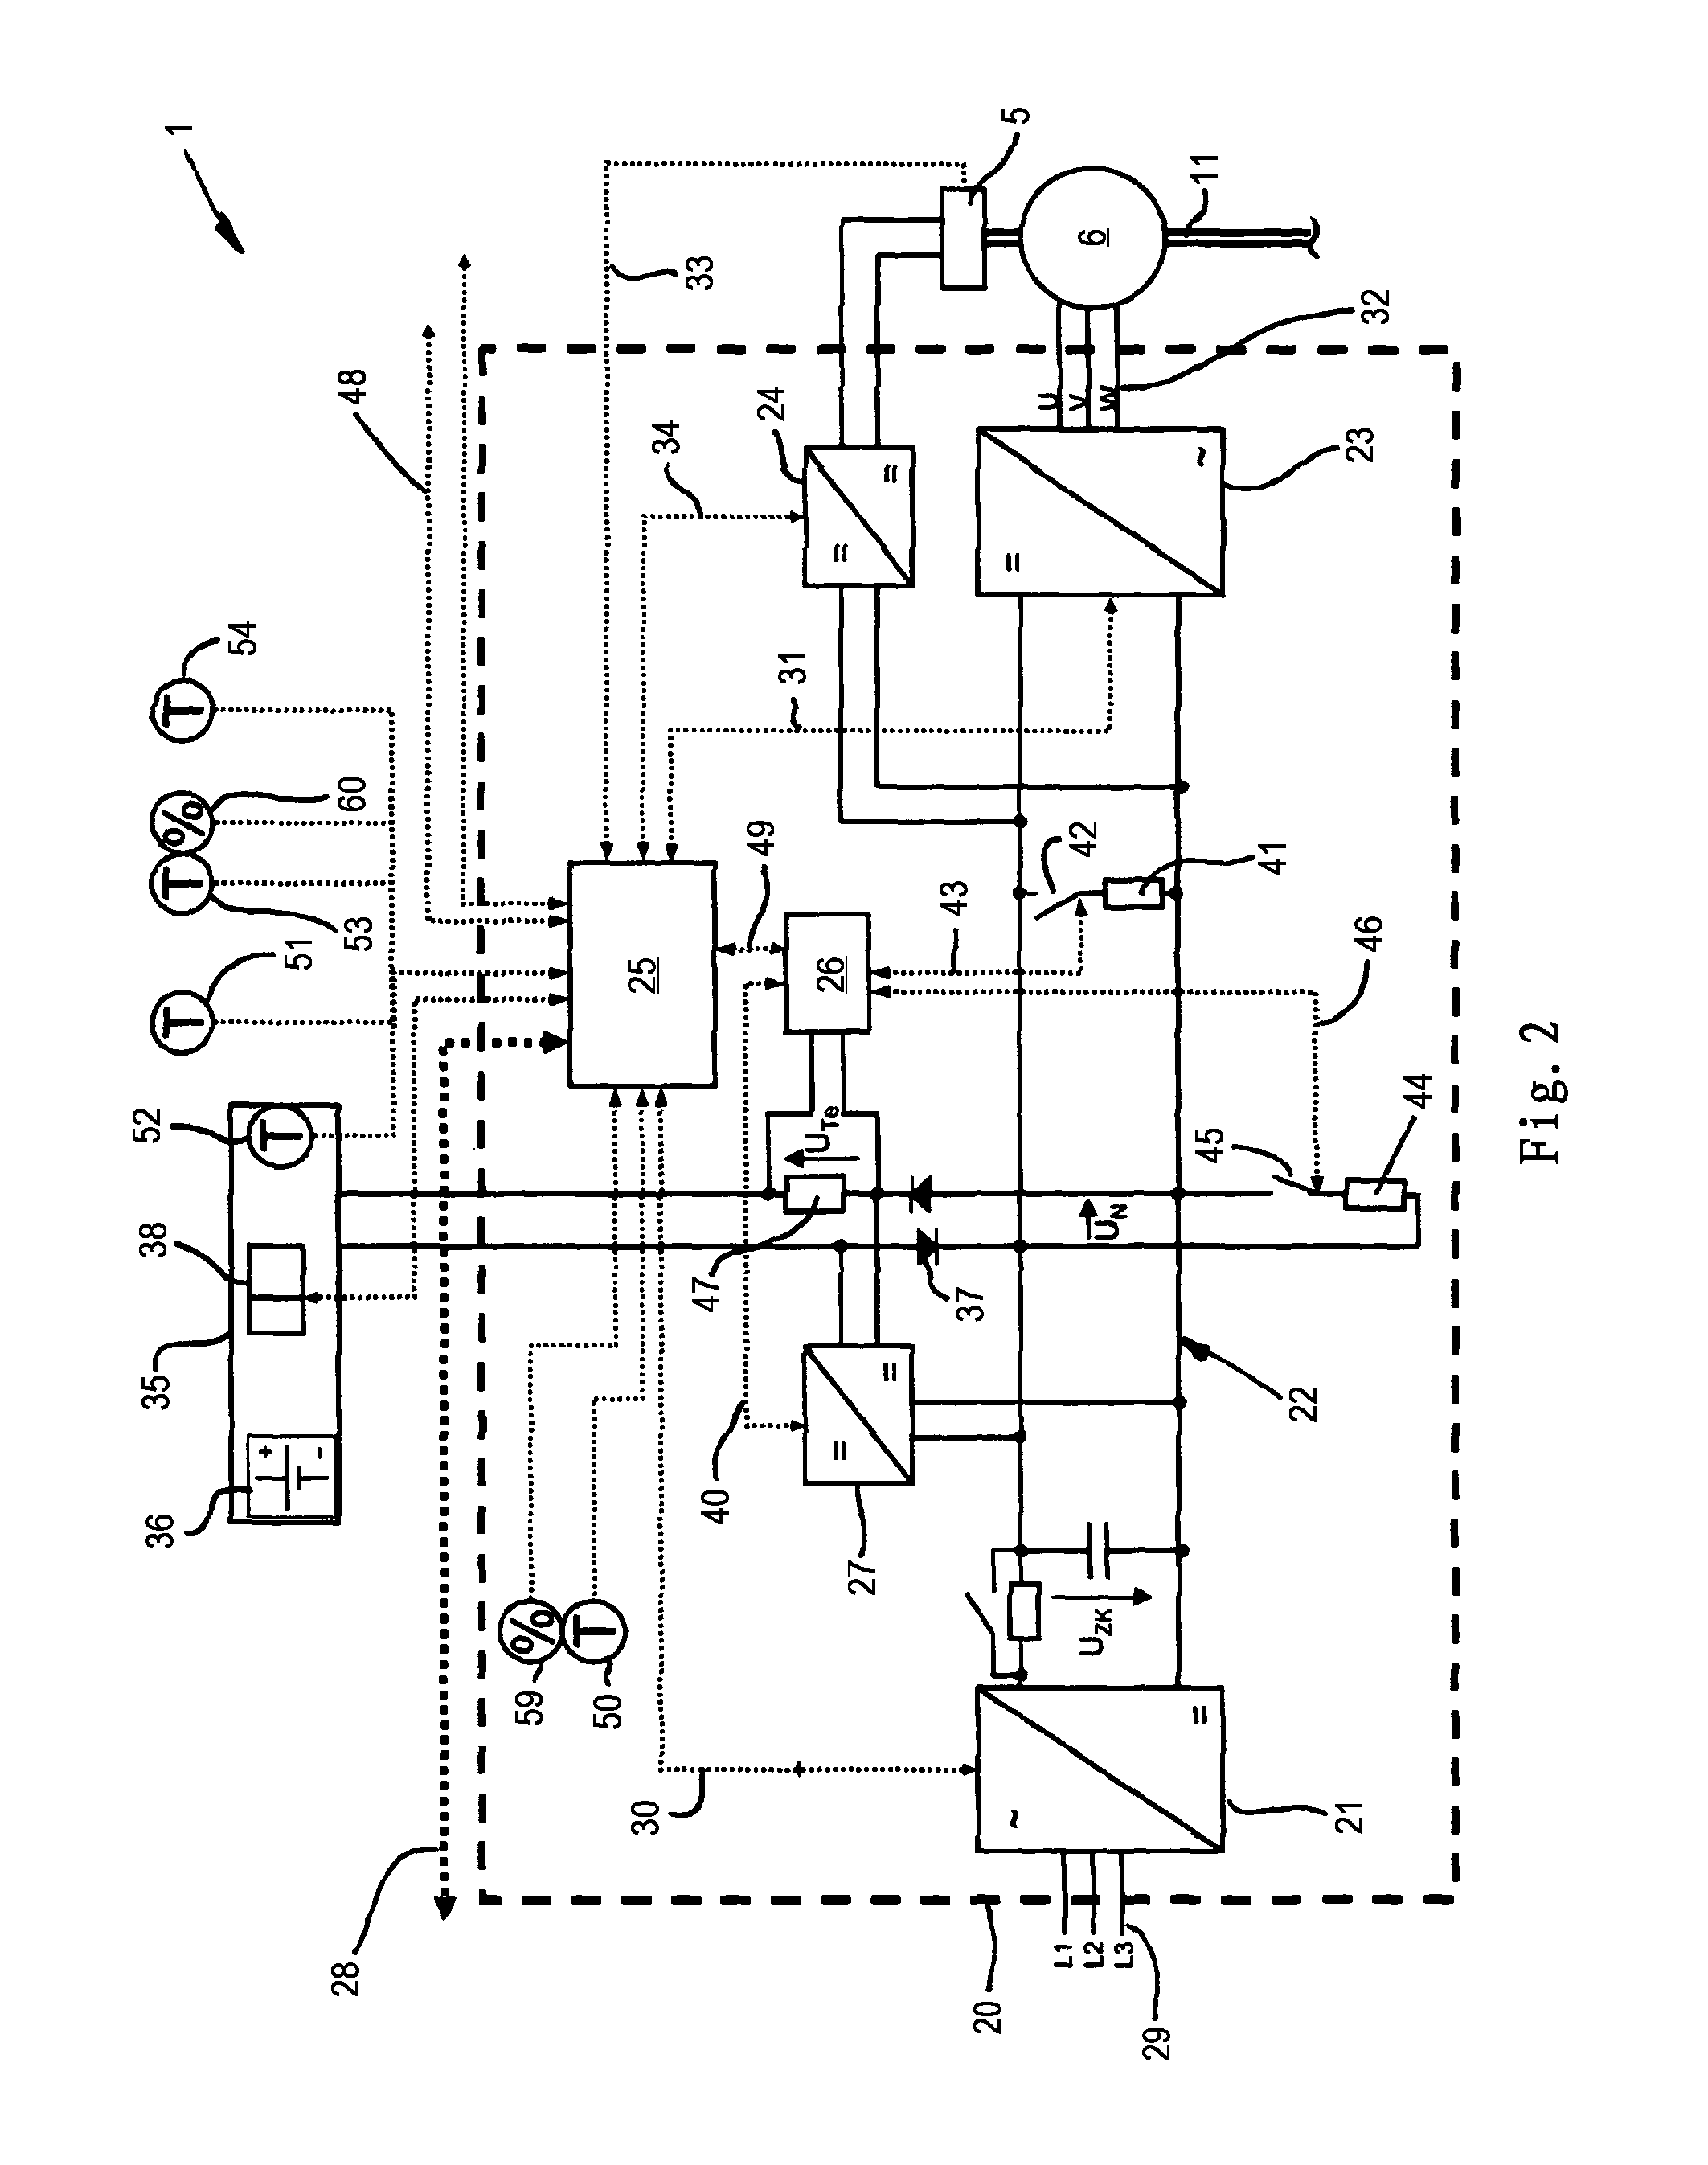 Drive device for a wind turbine